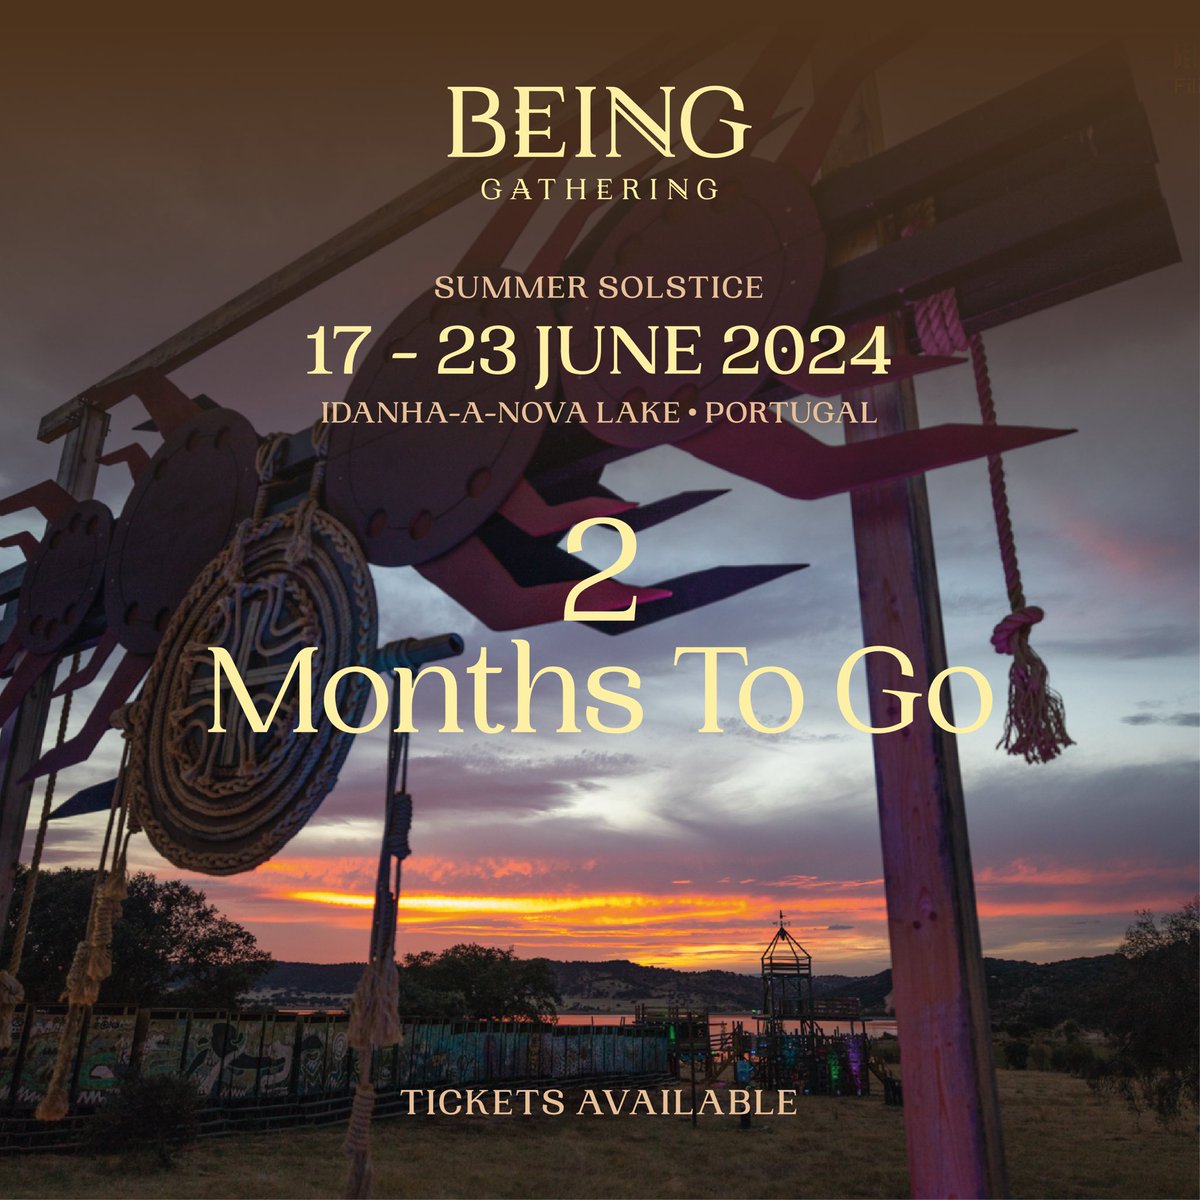 Join the #BeingGathering, a weeklong experience, a fusion of well-being, nature, arts, and music. Tickets available at being-gathering.org/2024/tickets/

#ShareTheJoy #Boomland #BeingGathering2024 #SummerSolstice